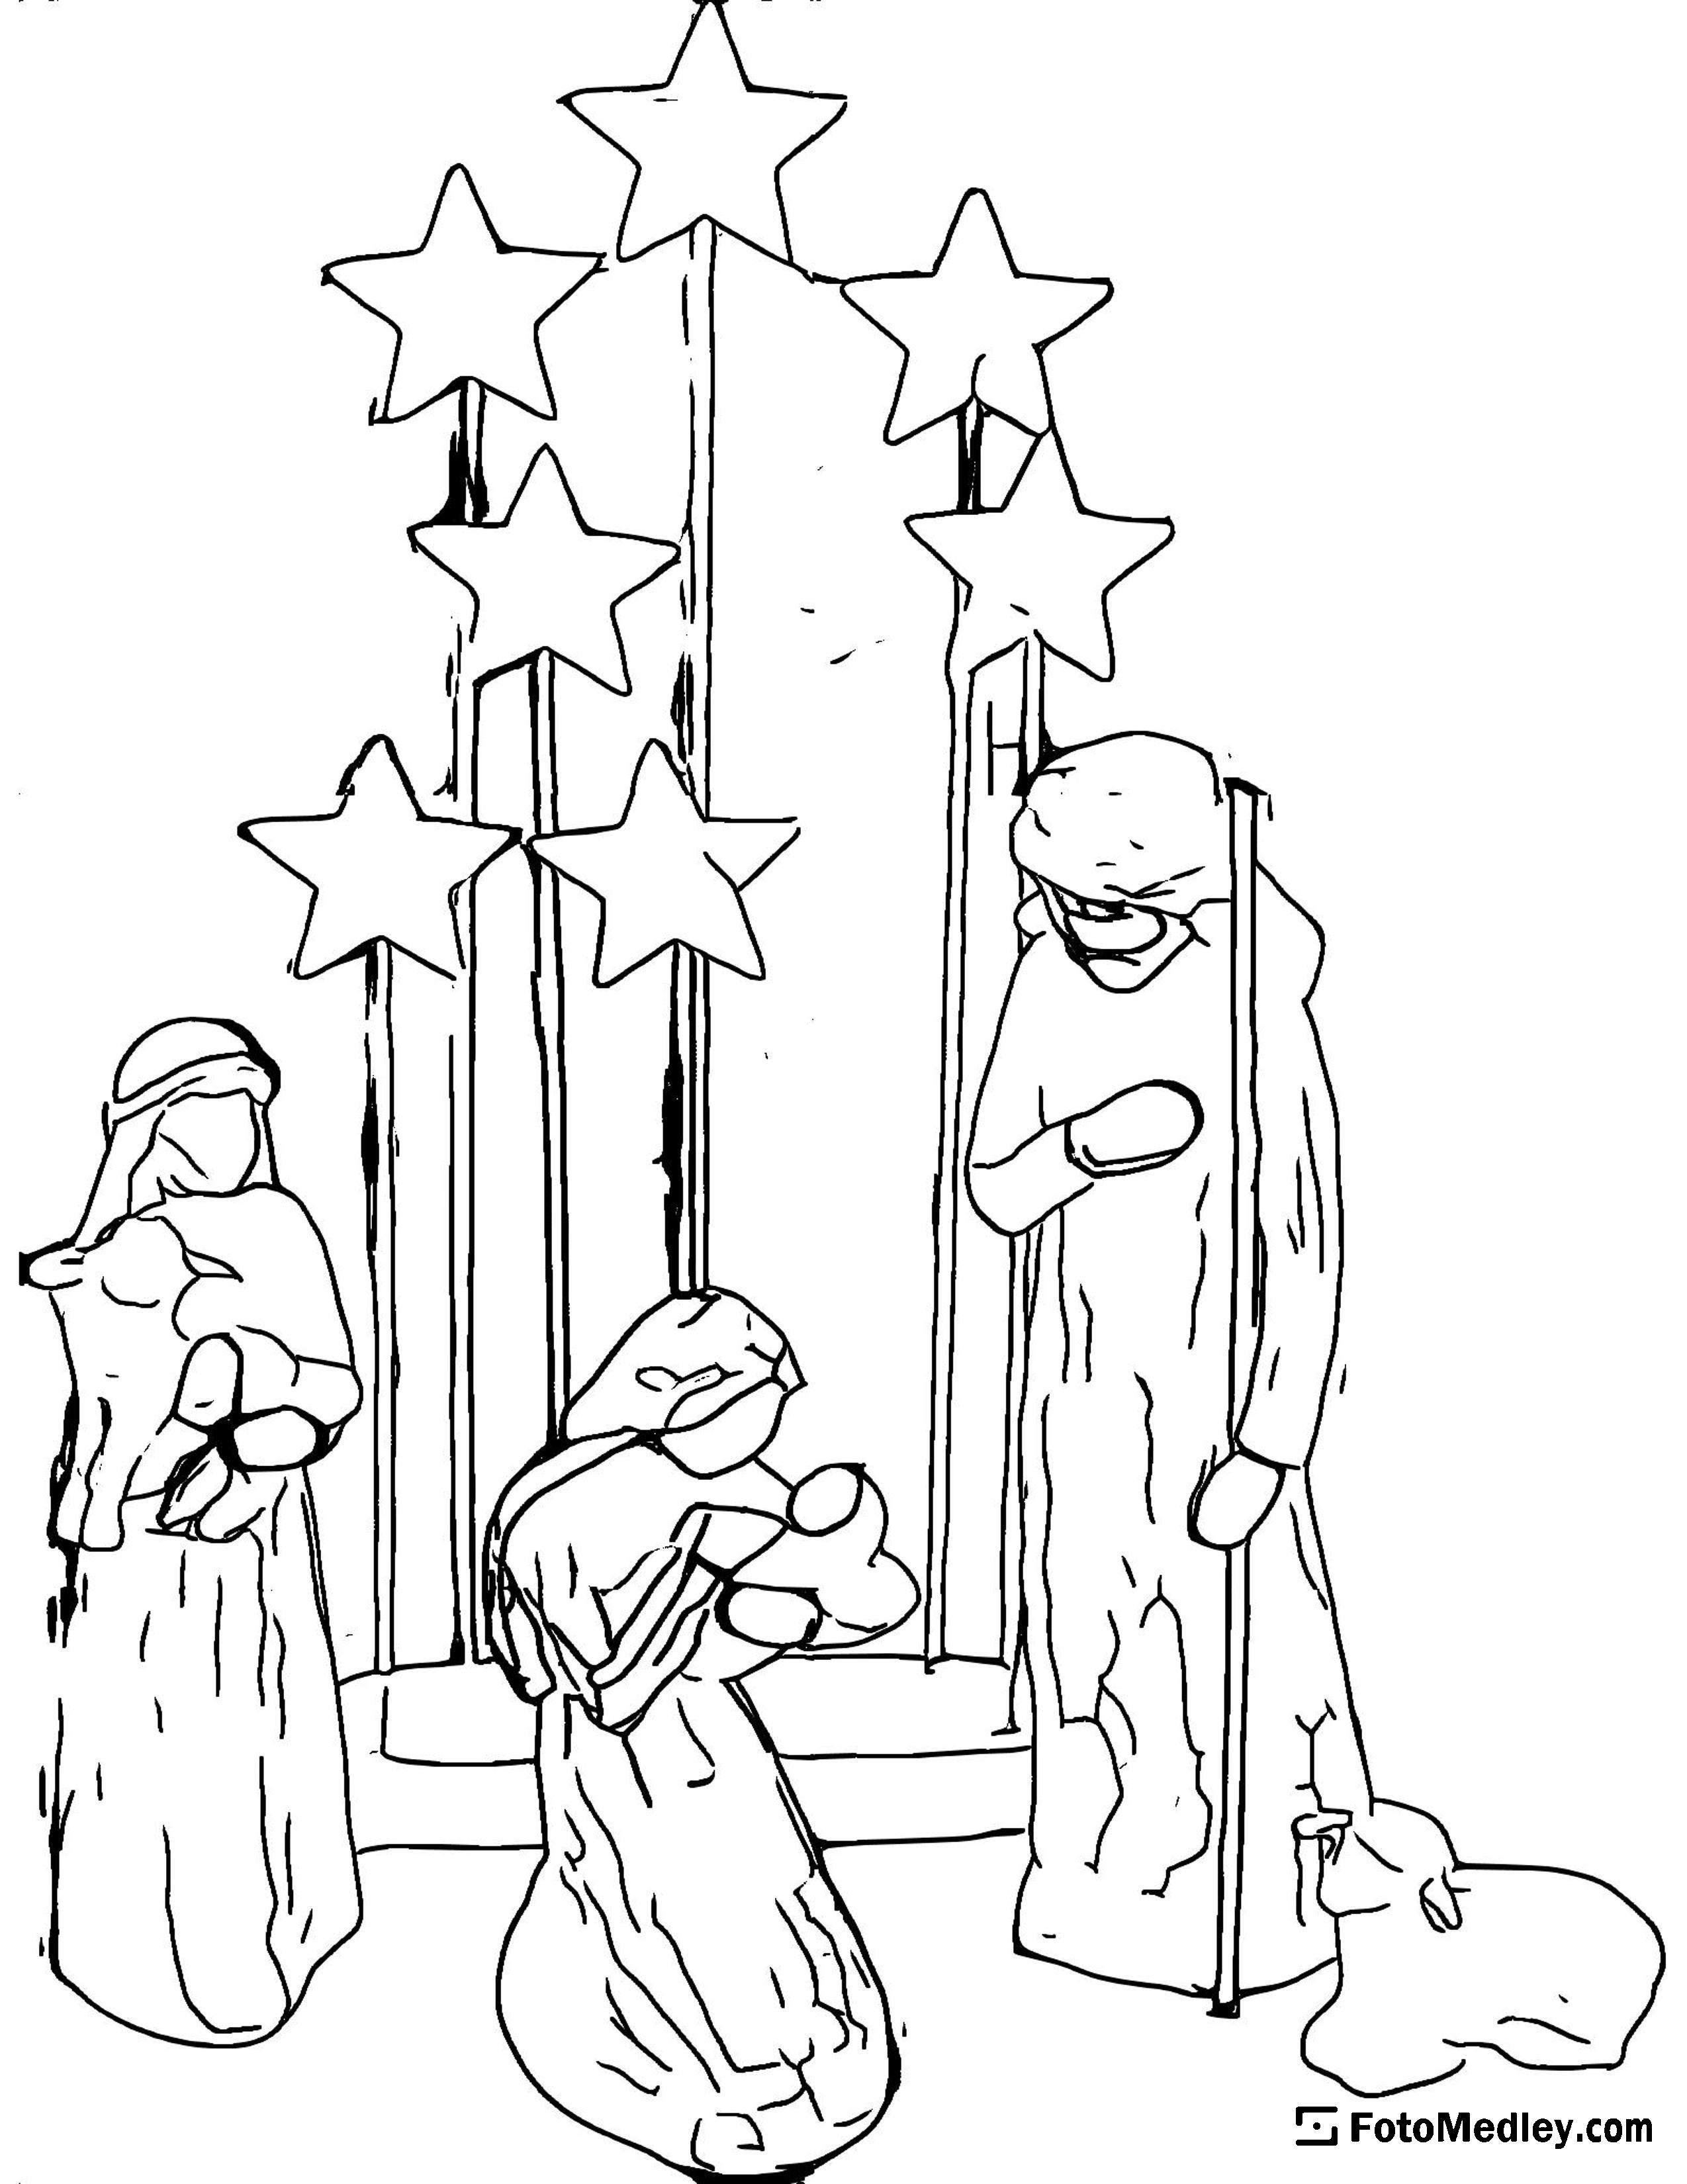 A simple coloring page depicting a Christmas nativity scene with stars, lambs, Mary holding Jesus, Joseph, and a shepherd.